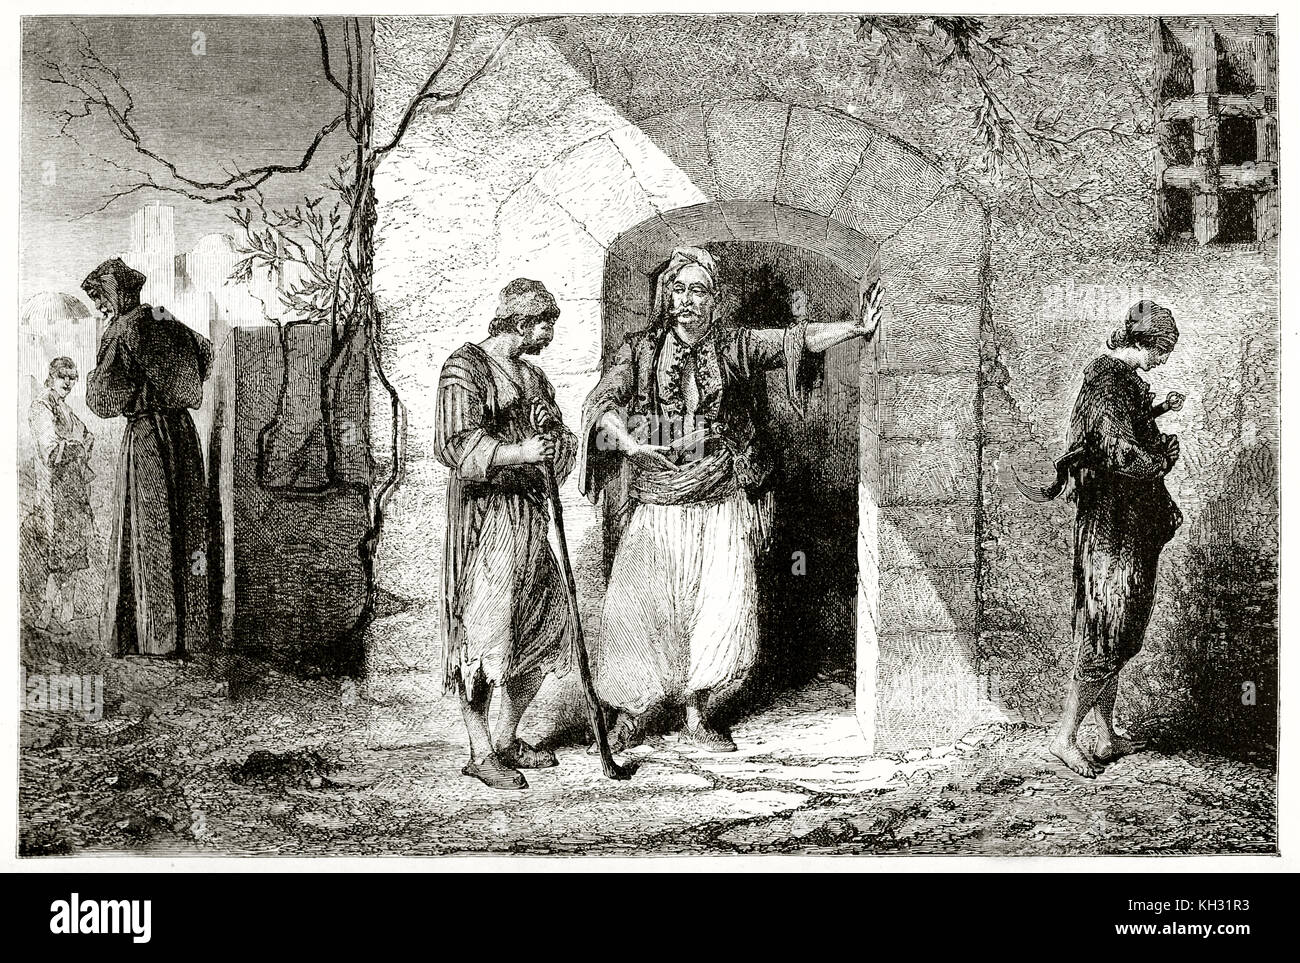 Old illustration depicting Syrian people in typical dresses. By Foulquier after Lockroy, publ. on le Tour du Monde, Paris, 1863 Stock Photo